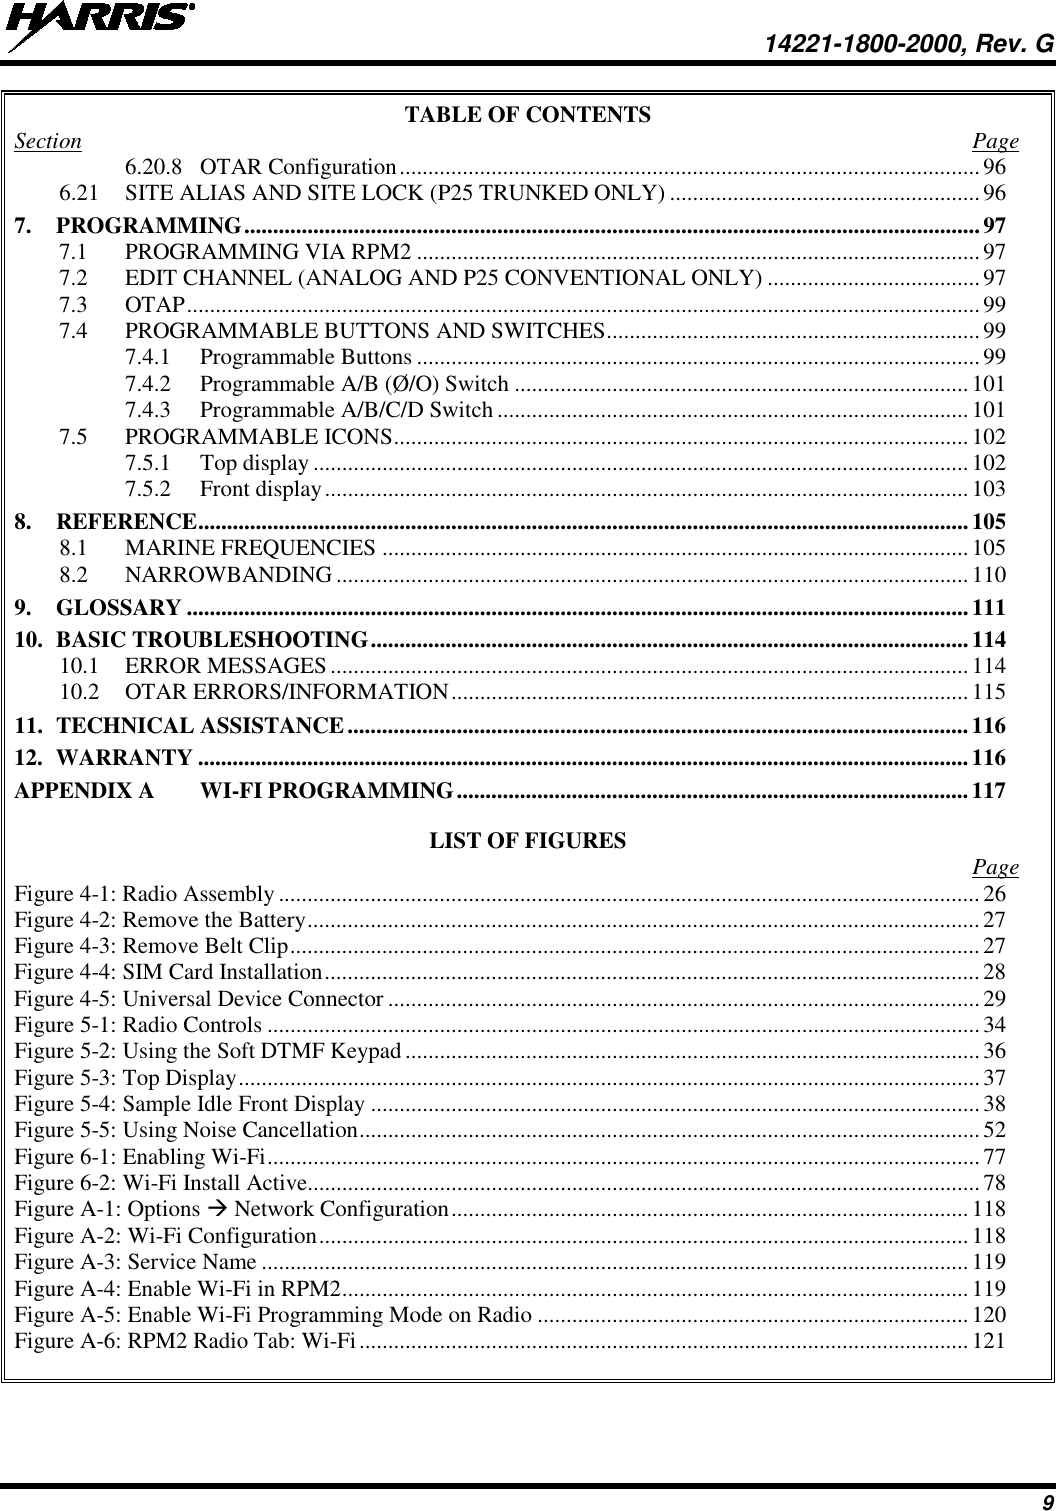  14221-1800-2000, Rev. G 9 TABLE OF CONTENTS Section  Page 6.20.8 OTAR Configuration ..................................................................................................... 96 6.21 SITE ALIAS AND SITE LOCK (P25 TRUNKED ONLY) ...................................................... 96 7. PROGRAMMING ................................................................................................................................ 97 7.1 PROGRAMMING VIA RPM2 .................................................................................................. 97 7.2 EDIT CHANNEL (ANALOG AND P25 CONVENTIONAL ONLY) ..................................... 97 7.3 OTAP .......................................................................................................................................... 99 7.4 PROGRAMMABLE BUTTONS AND SWITCHES ................................................................. 99 7.4.1 Programmable Buttons .................................................................................................. 99 7.4.2 Programmable A/B (Ø/O) Switch ............................................................................... 101 7.4.3 Programmable A/B/C/D Switch .................................................................................. 101 7.5 PROGRAMMABLE ICONS .................................................................................................... 102 7.5.1 Top display .................................................................................................................. 102 7.5.2 Front display ................................................................................................................ 103 8. REFERENCE ...................................................................................................................................... 105 8.1 MARINE FREQUENCIES ...................................................................................................... 105 8.2 NARROWBANDING .............................................................................................................. 110 9. GLOSSARY ........................................................................................................................................ 111 10. BASIC TROUBLESHOOTING ........................................................................................................ 114 10.1 ERROR MESSAGES ............................................................................................................... 114 10.2 OTAR ERRORS/INFORMATION .......................................................................................... 115 11. TECHNICAL ASSISTANCE ............................................................................................................ 116 12. WARRANTY ...................................................................................................................................... 116 APPENDIX A WI-FI PROGRAMMING ......................................................................................... 117  LIST OF FIGURES   Page Figure 4-1: Radio Assembly .......................................................................................................................... 26 Figure 4-2: Remove the Battery ..................................................................................................................... 27 Figure 4-3: Remove Belt Clip ........................................................................................................................ 27 Figure 4-4: SIM Card Installation .................................................................................................................. 28 Figure 4-5: Universal Device Connector ....................................................................................................... 29 Figure 5-1: Radio Controls ............................................................................................................................ 34 Figure 5-2: Using the Soft DTMF Keypad .................................................................................................... 36 Figure 5-3: Top Display ................................................................................................................................. 37 Figure 5-4: Sample Idle Front Display .......................................................................................................... 38 Figure 5-5: Using Noise Cancellation ............................................................................................................ 52 Figure 6-1: Enabling Wi-Fi ............................................................................................................................ 77 Figure 6-2: Wi-Fi Install Active ..................................................................................................................... 78 Figure A-1: Options  Network Configuration .......................................................................................... 118 Figure A-2: Wi-Fi Configuration ................................................................................................................. 118 Figure A-3: Service Name ........................................................................................................................... 119 Figure A-4: Enable Wi-Fi in RPM2 ............................................................................................................. 119 Figure A-5: Enable Wi-Fi Programming Mode on Radio ........................................................................... 120 Figure A-6: RPM2 Radio Tab: Wi-Fi .......................................................................................................... 121  